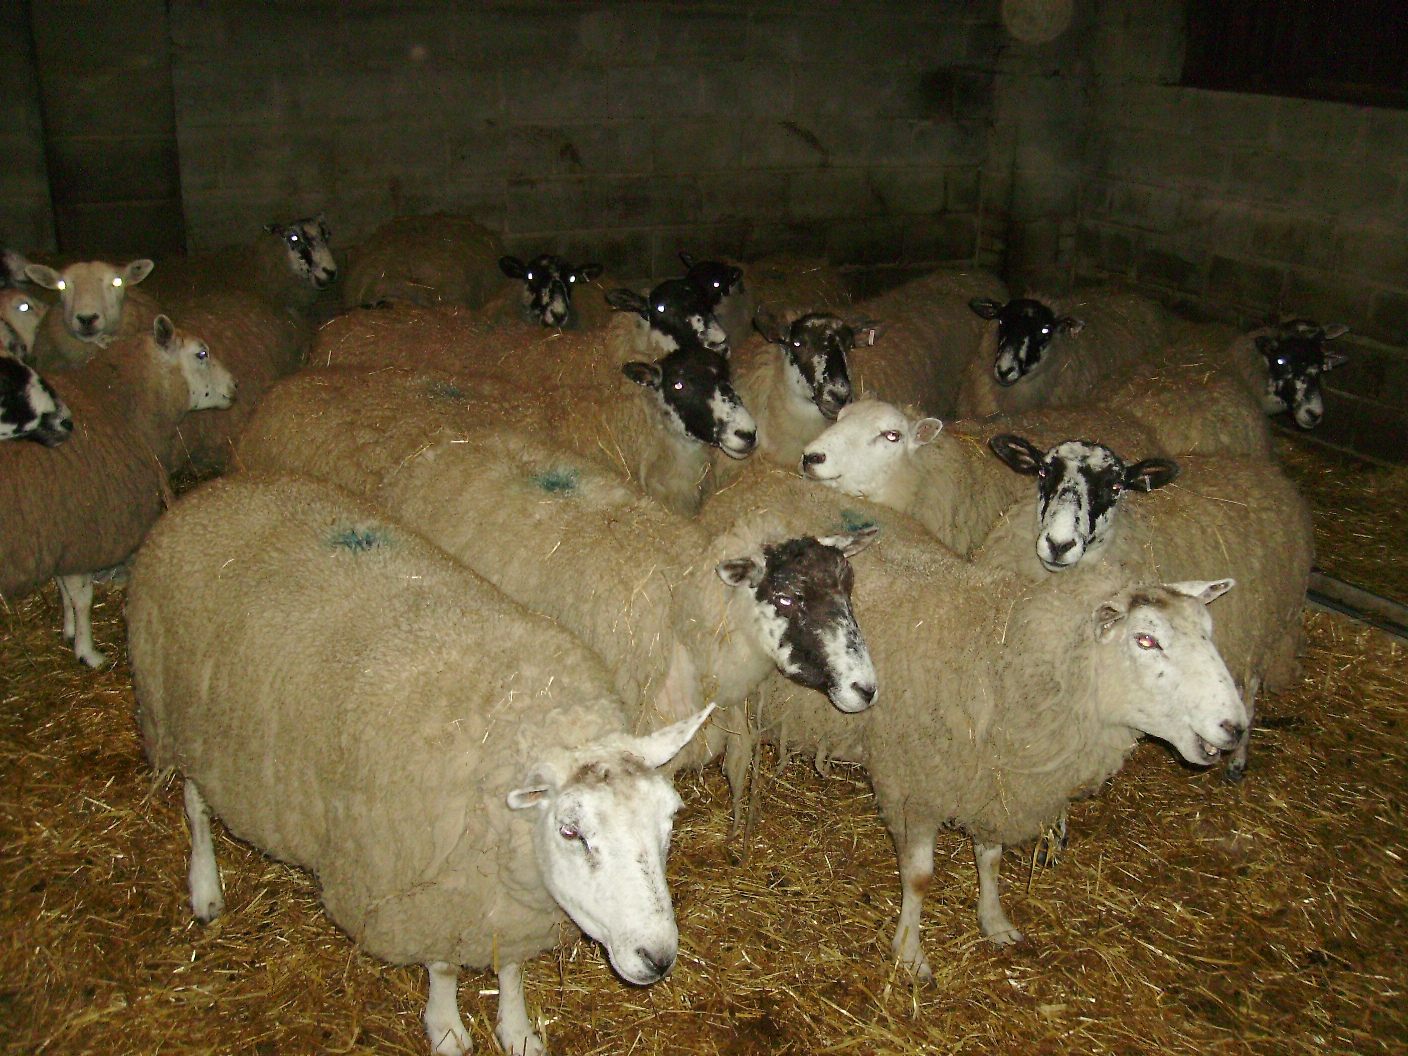 affected ewes may separate from the flock and appear depressed and inappetent, as the ewe in the foreground of this photo shows